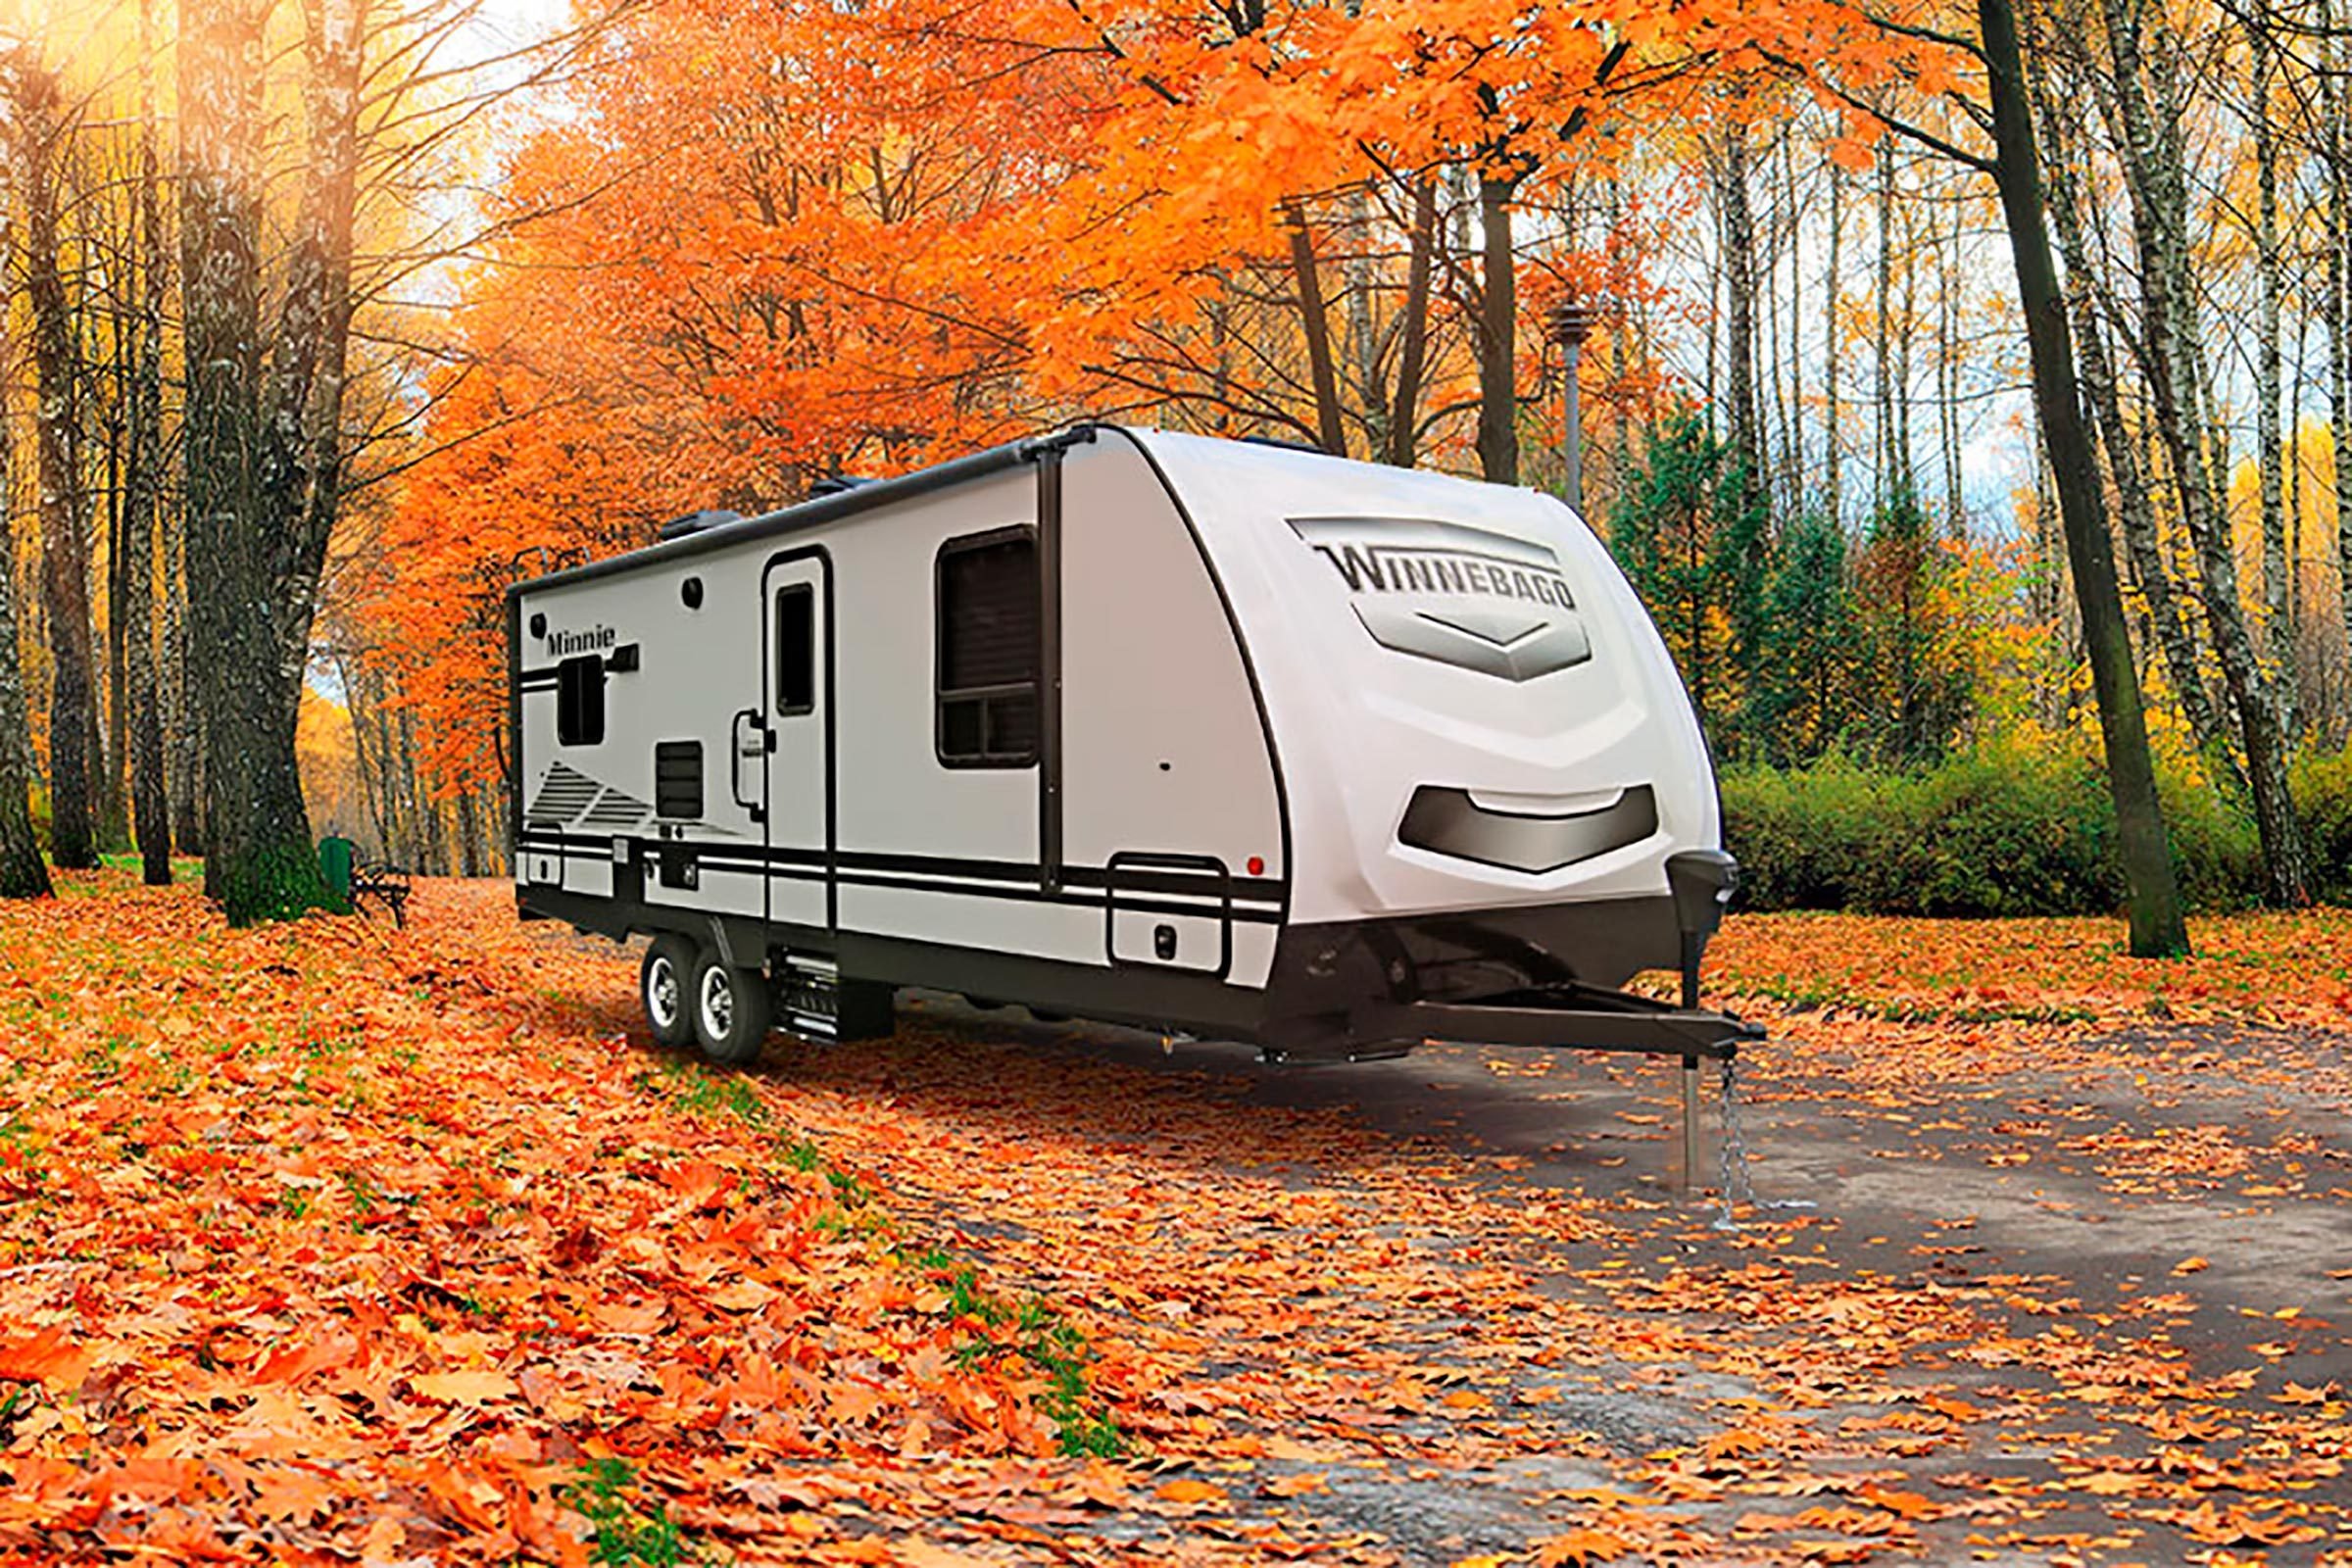 new travel trailers with eat at kitchen bar